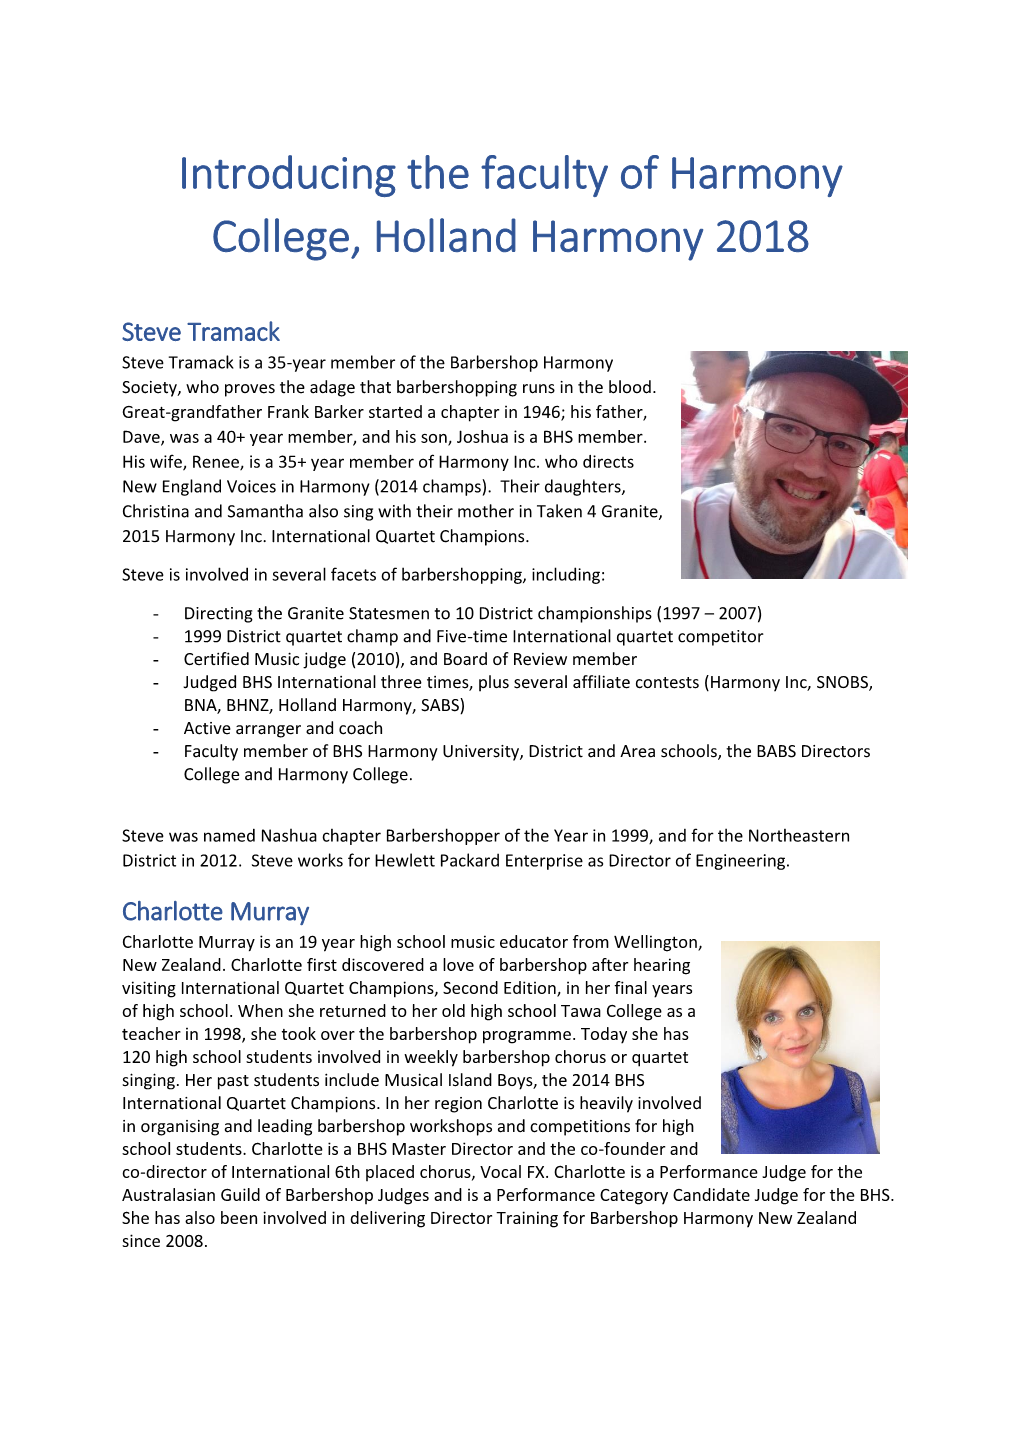 Introducing the Faculty of Harmony College, Holland Harmony 2018